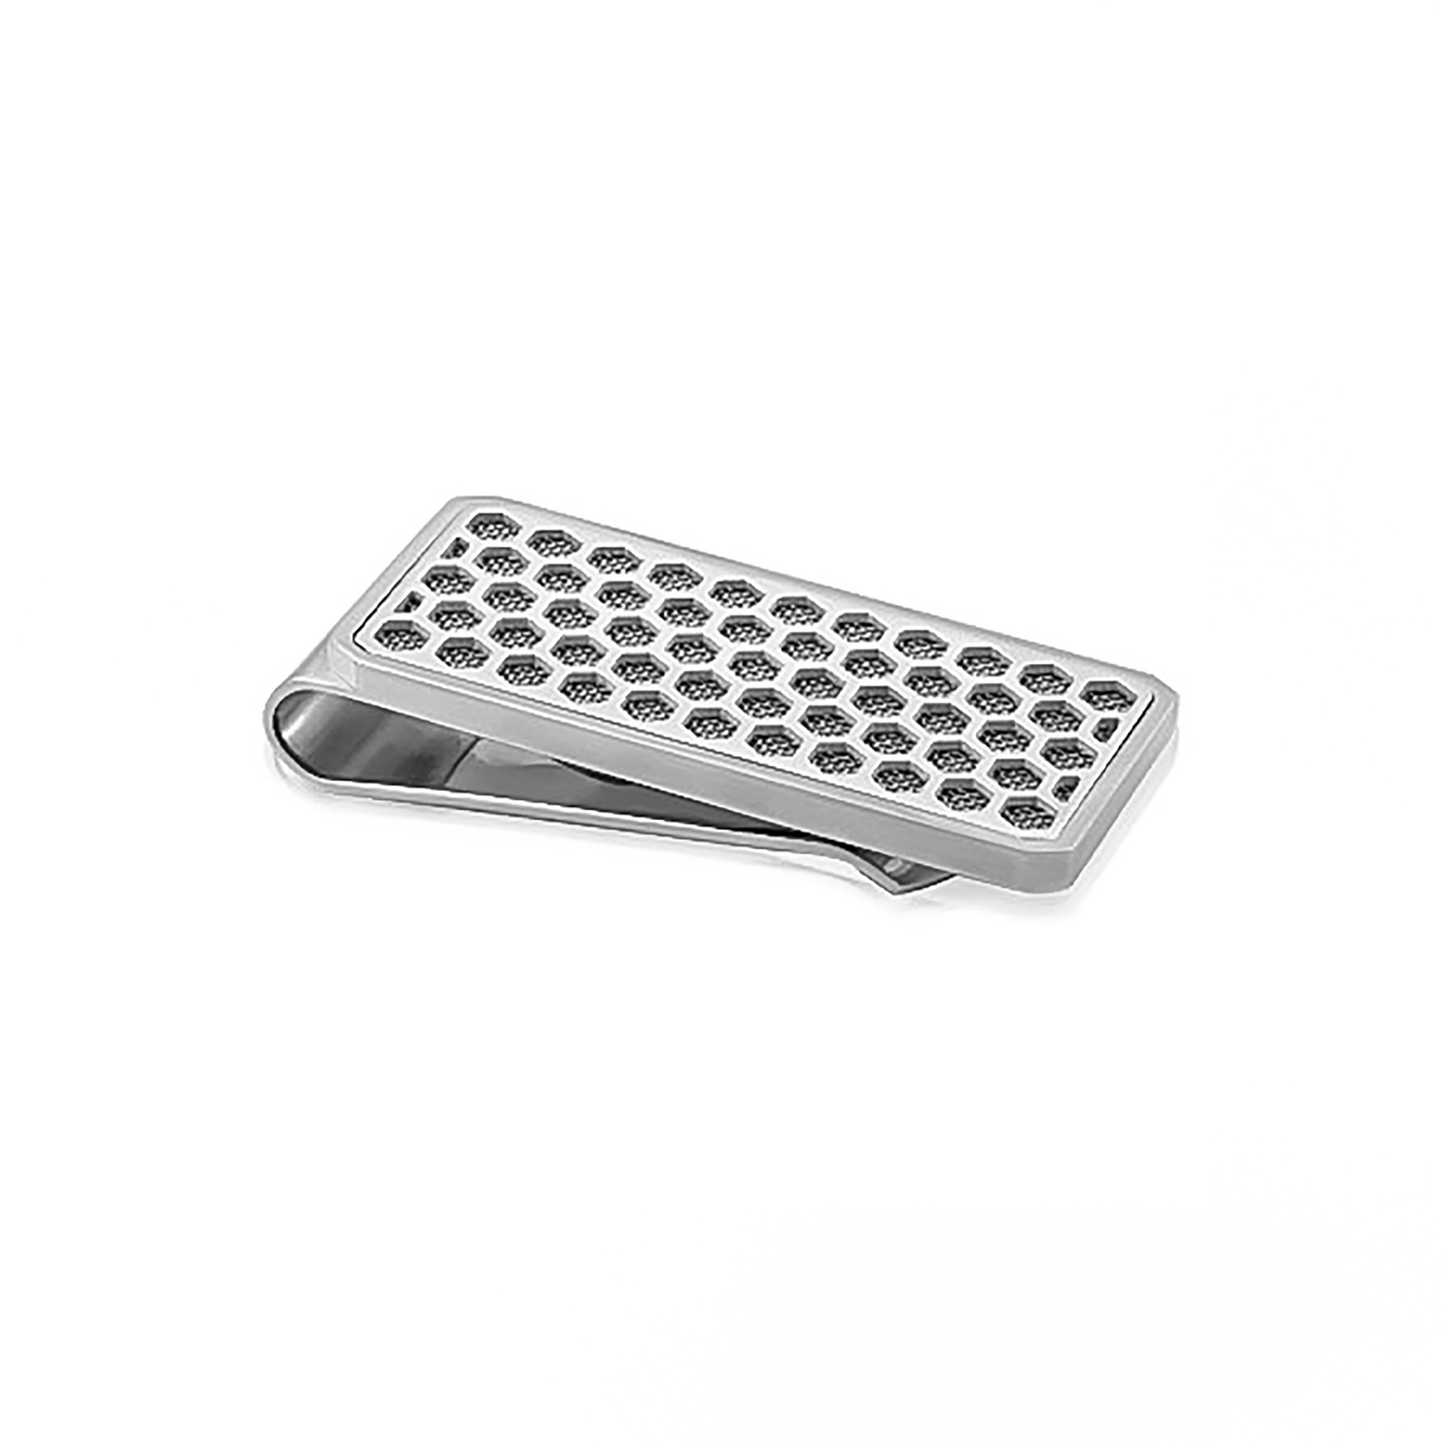 Honeycomb Designed Stainless Steel Money Clip by ARZ STEEL